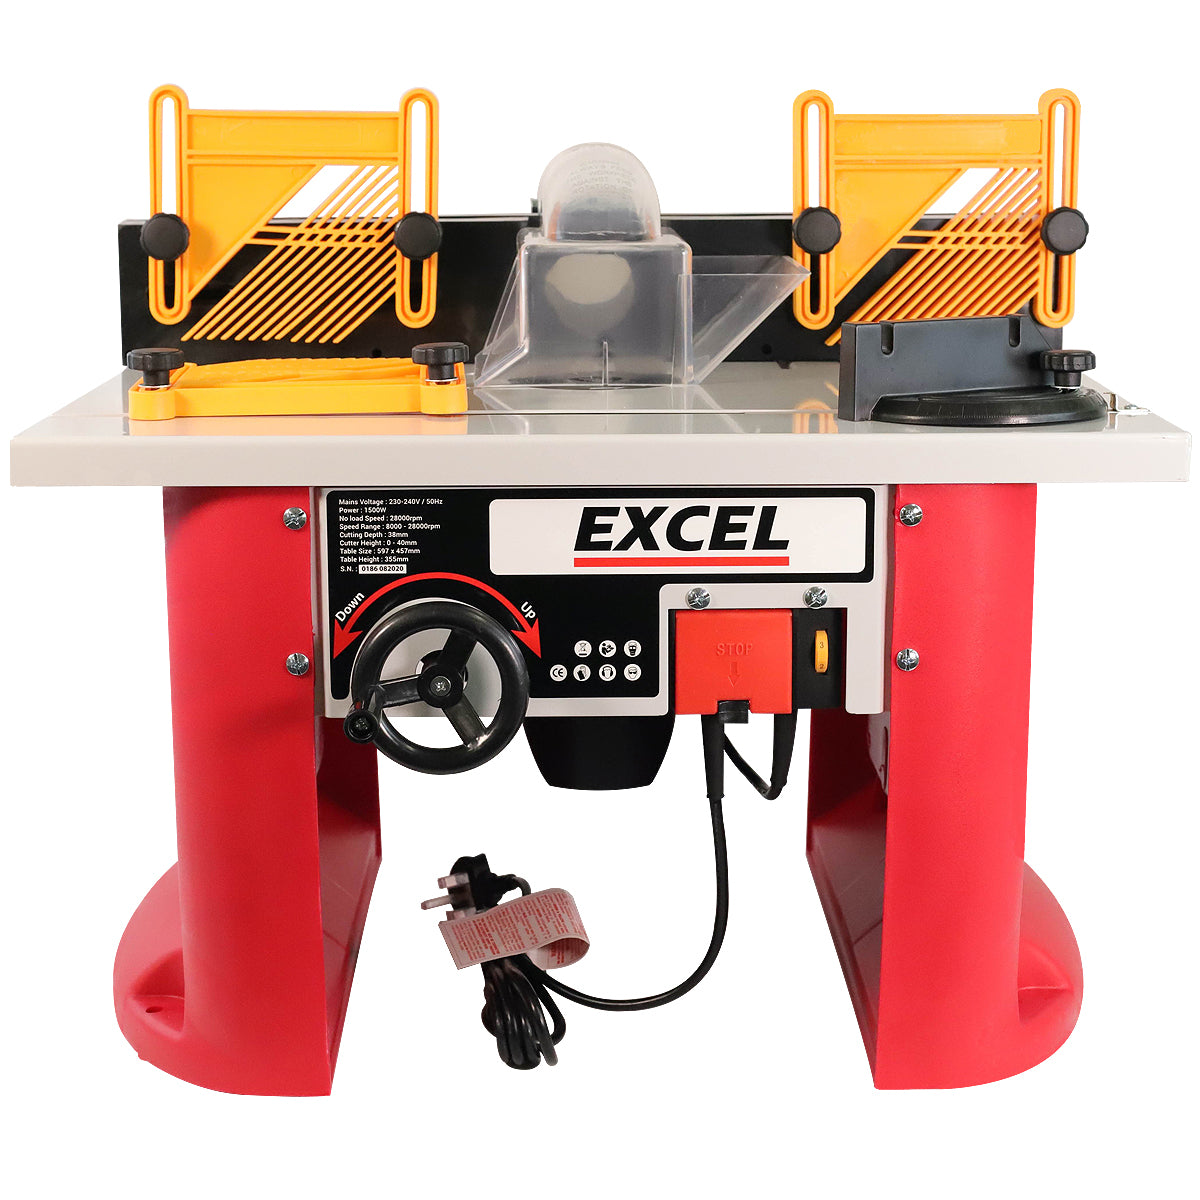 Excel Table Router Cutter 240V with 1/4in Shank Router Cutter Bit 35 Piece Set